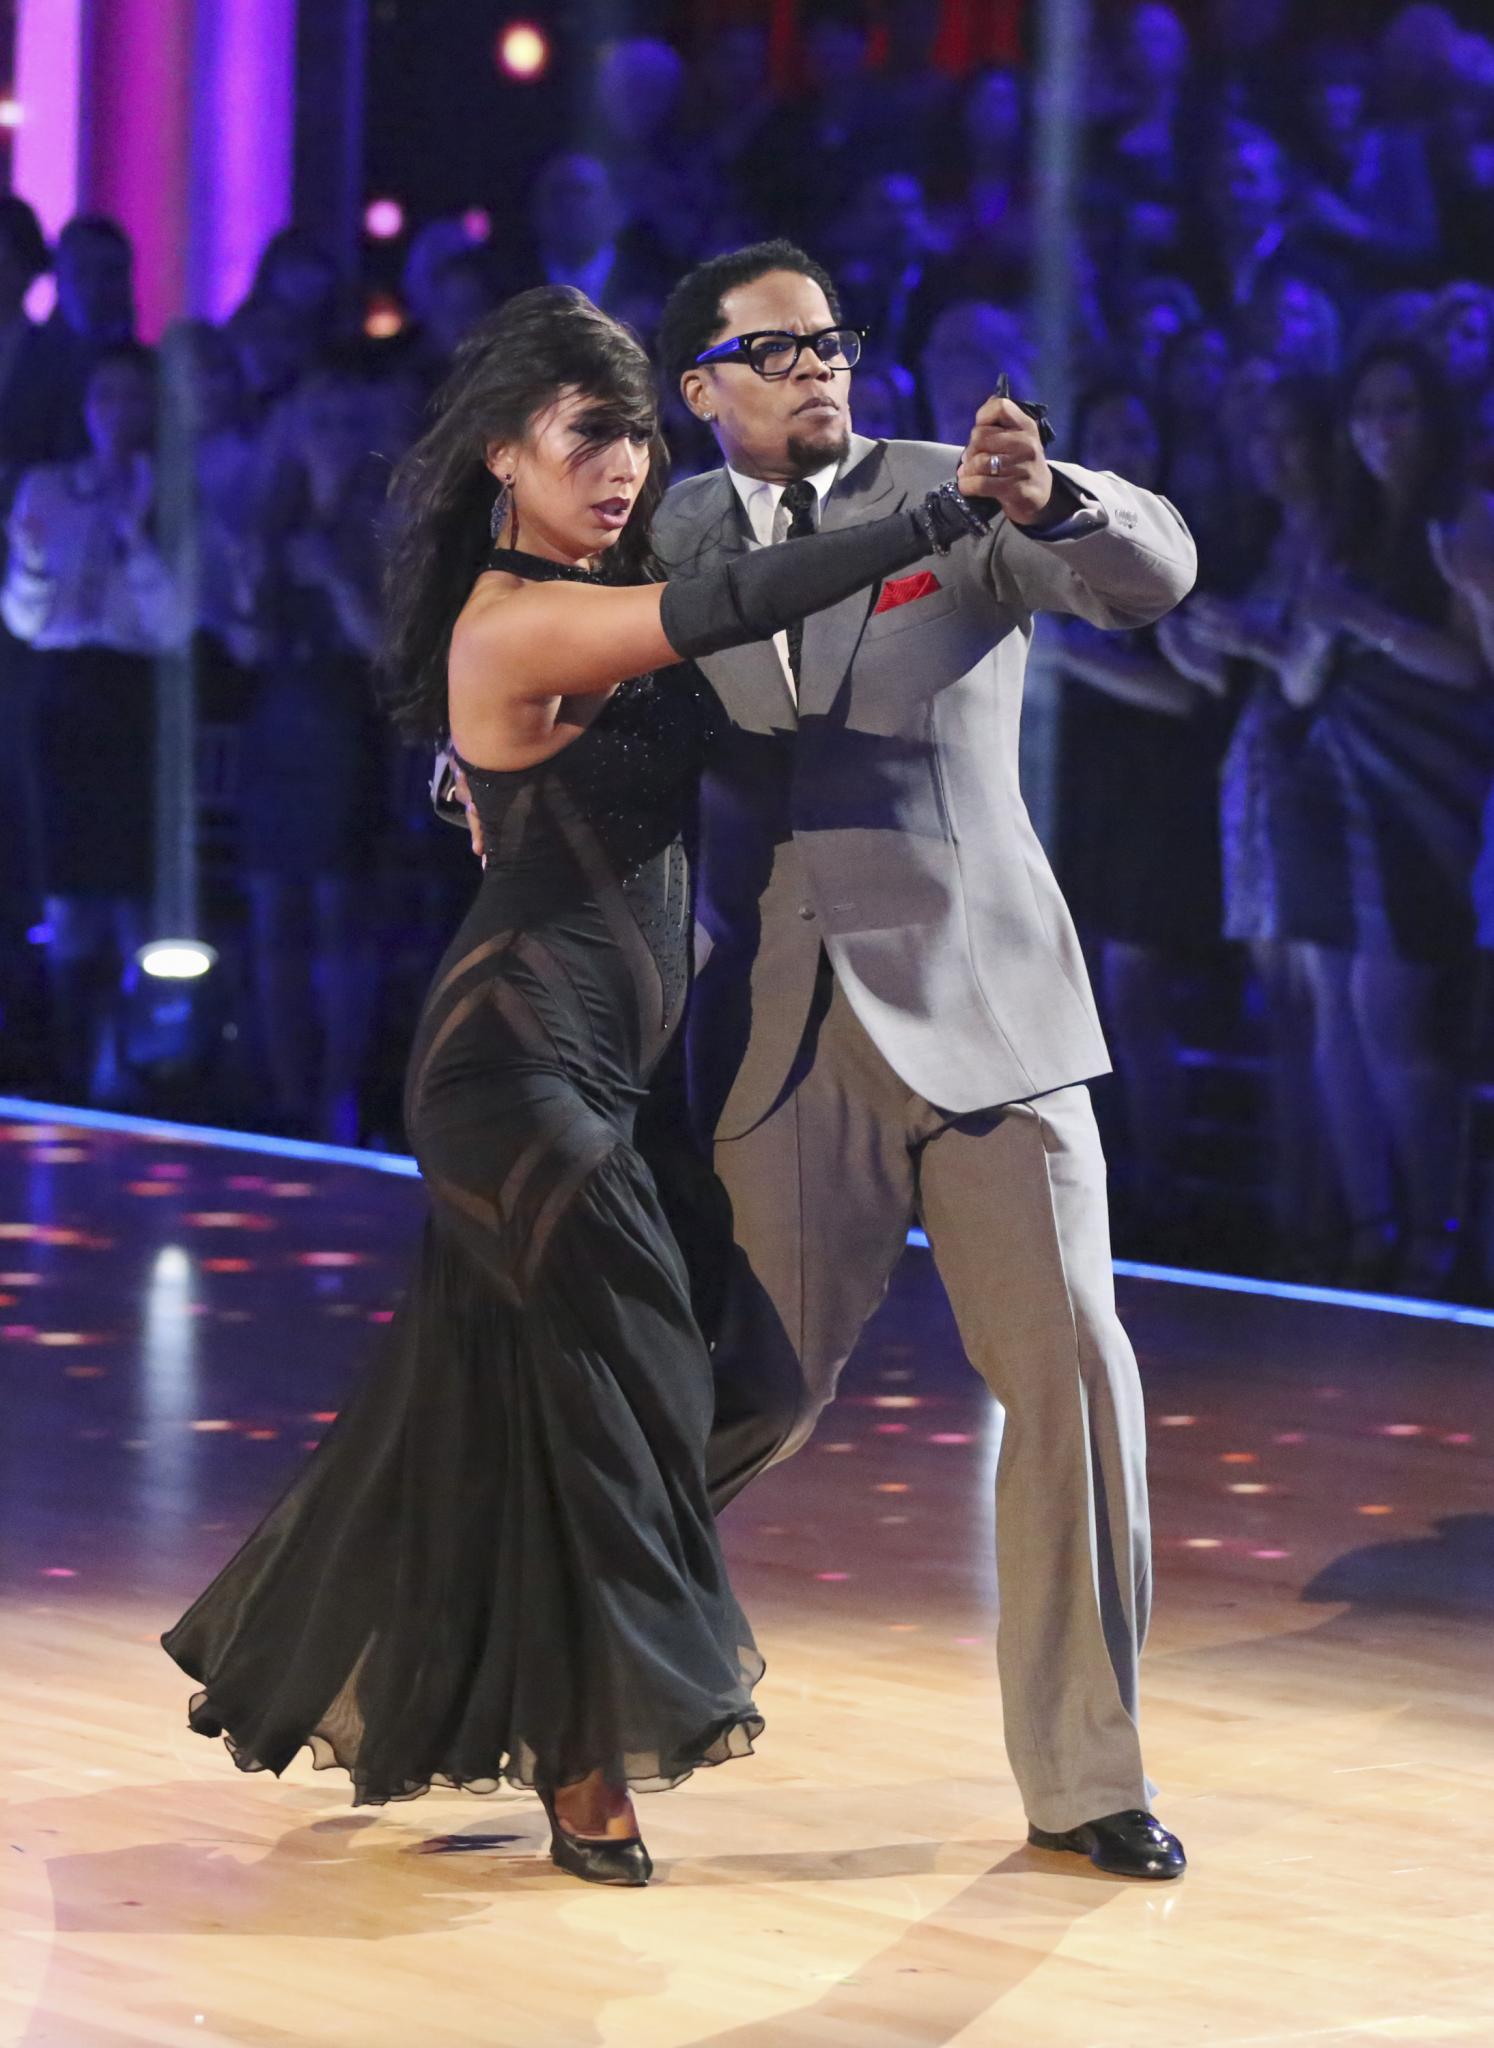 D.L. Hughley Eliminated from 'Dancing with the Stars'